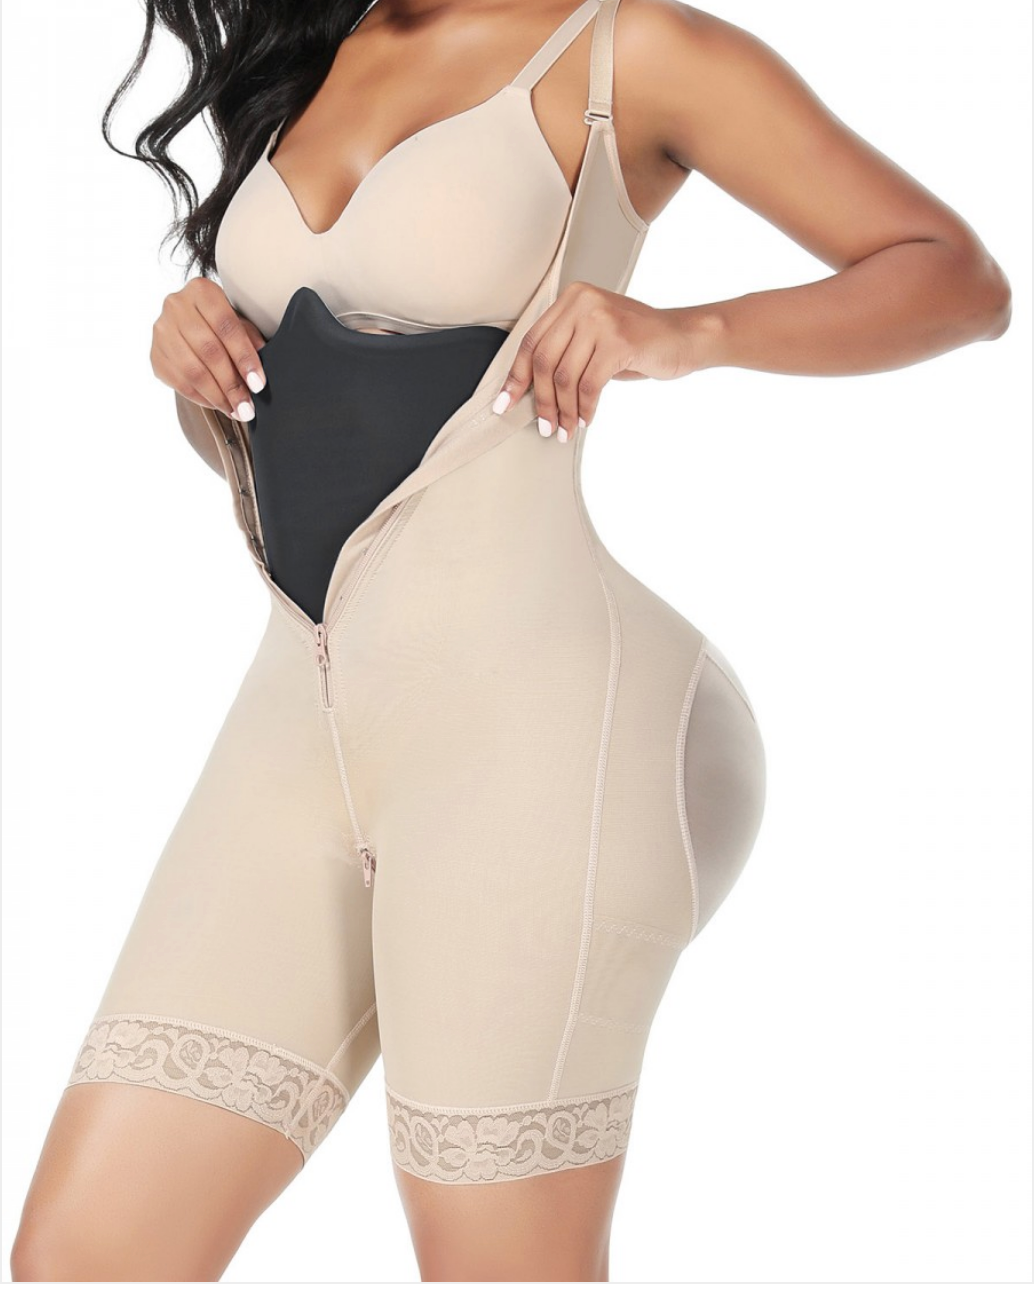 Snatched-Body - Going… Going… Almost gone! 🔥 Grab your Snatched Body Black  Faja and your nude faja before they're alllll gone! Our Snatched Doll  love'em, and we just got a small re-stock